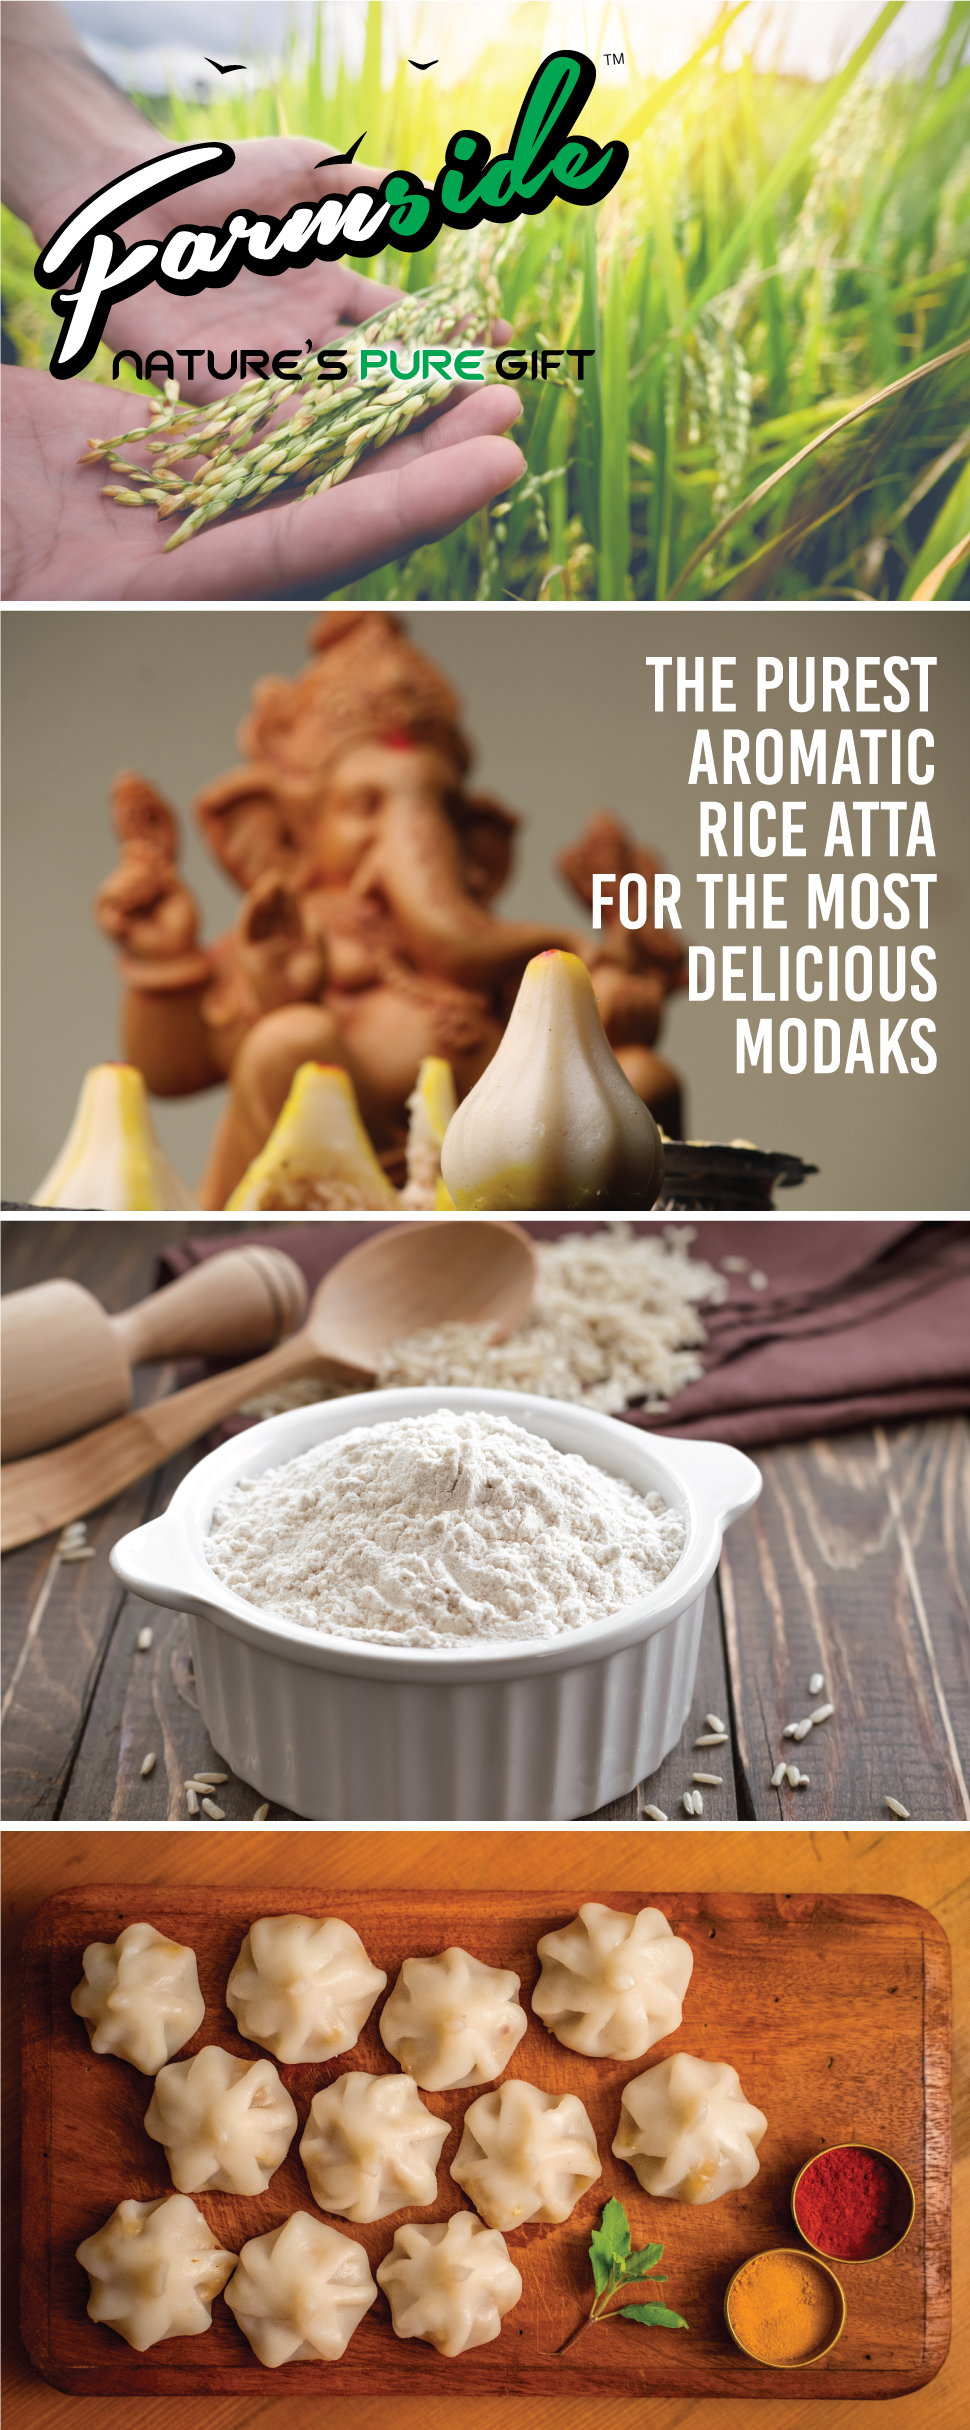 Image of A+ Content for Rice Atta from Farmside with pictures of modak